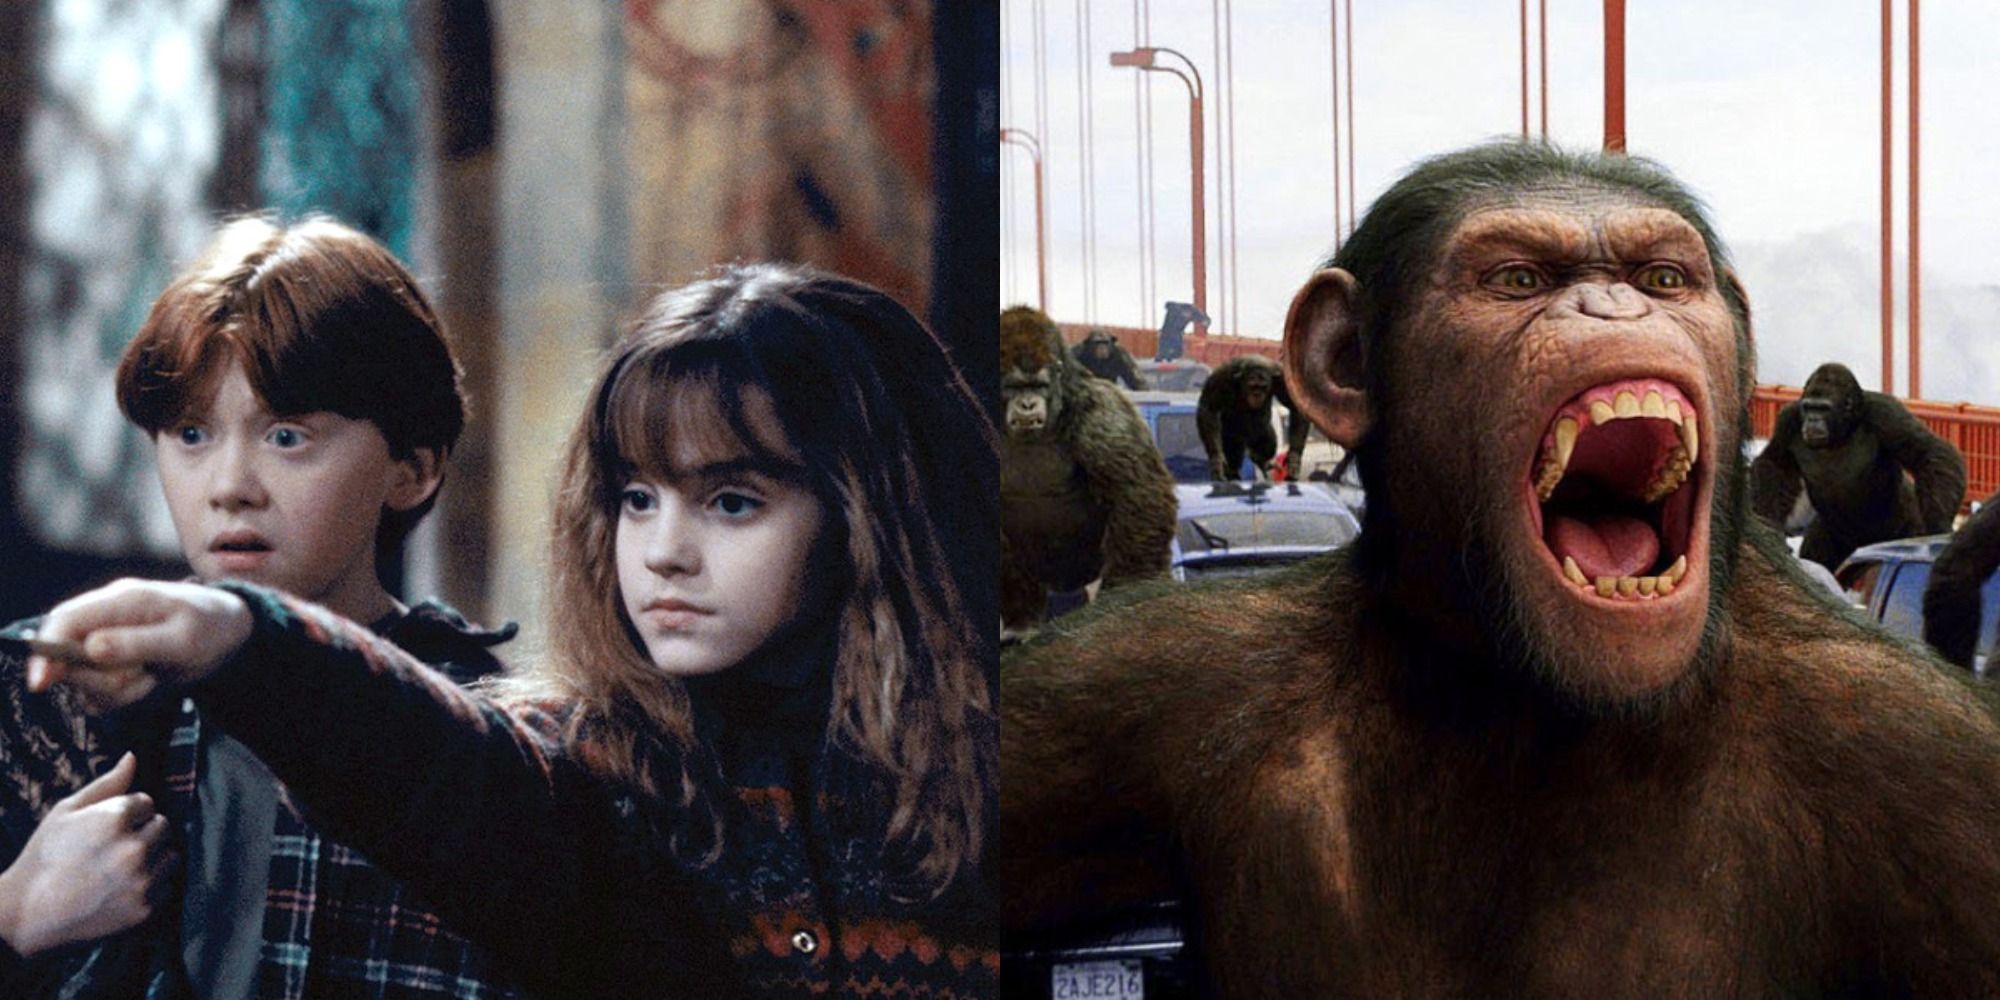 Split image of Harry Potter and Rise of the Planet of the Apes